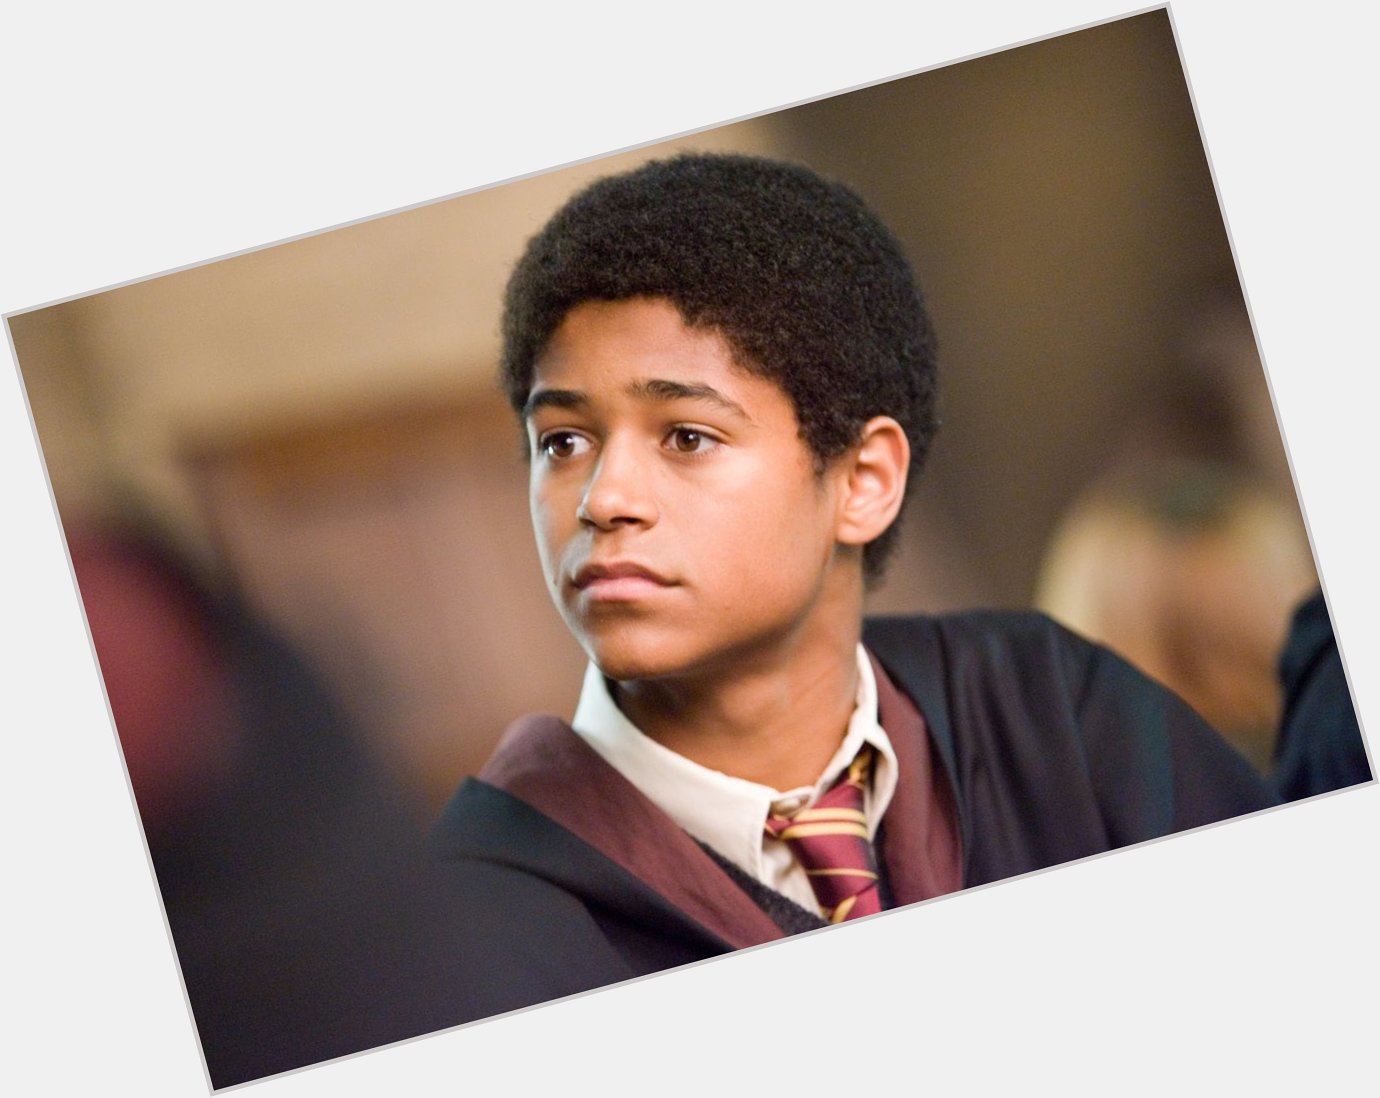 Happy Birthday to Alfred Enoch! He was Dean Thomas in the Harry Potter films. 